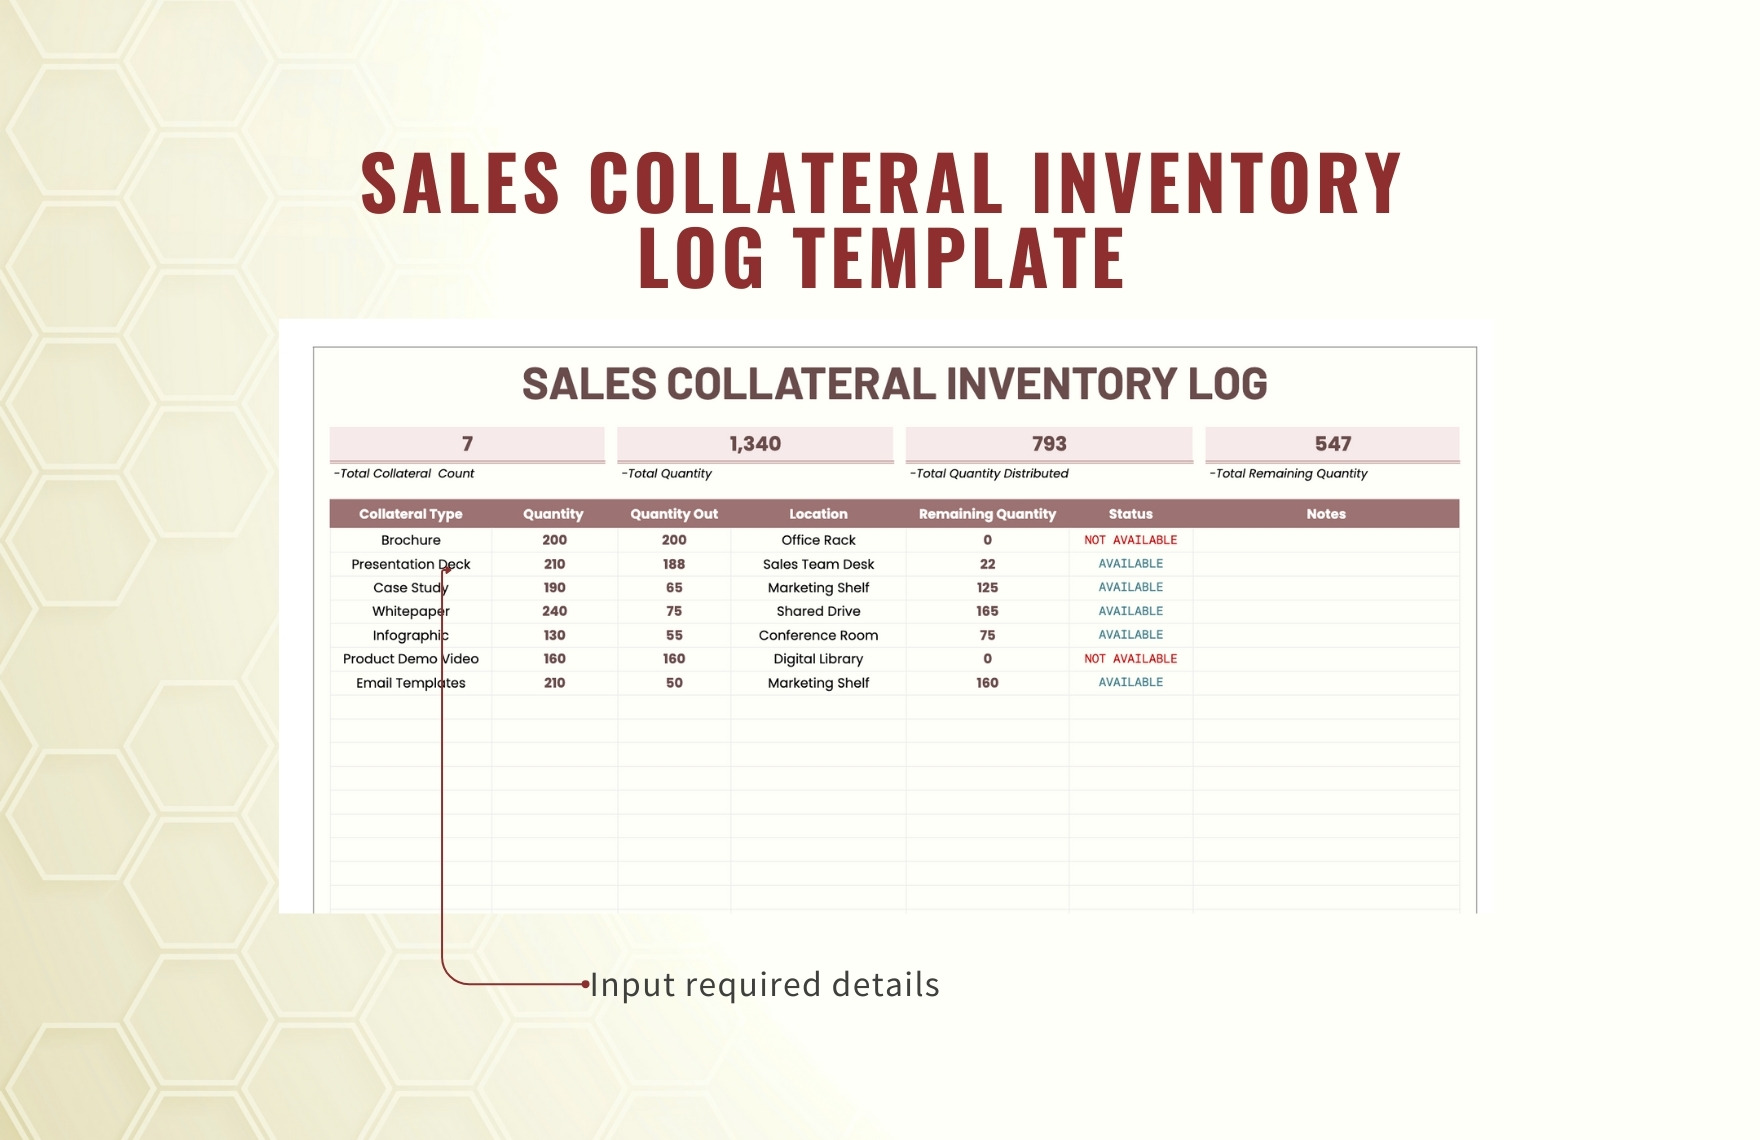 Sales Collateral Inventory Log Template